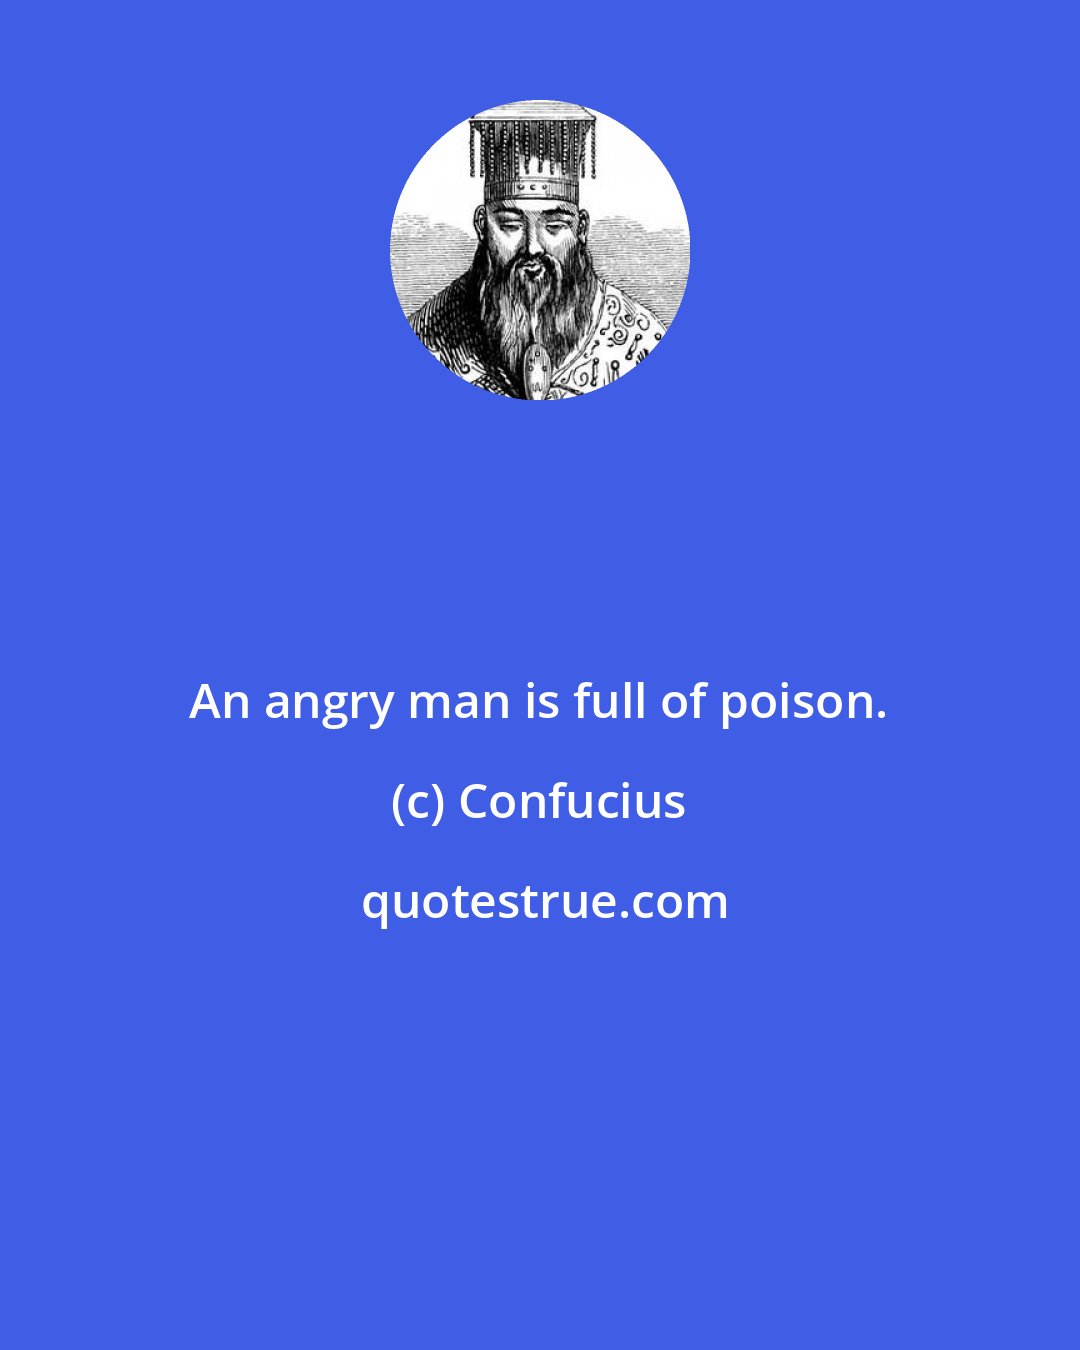 Confucius: An angry man is full of poison.